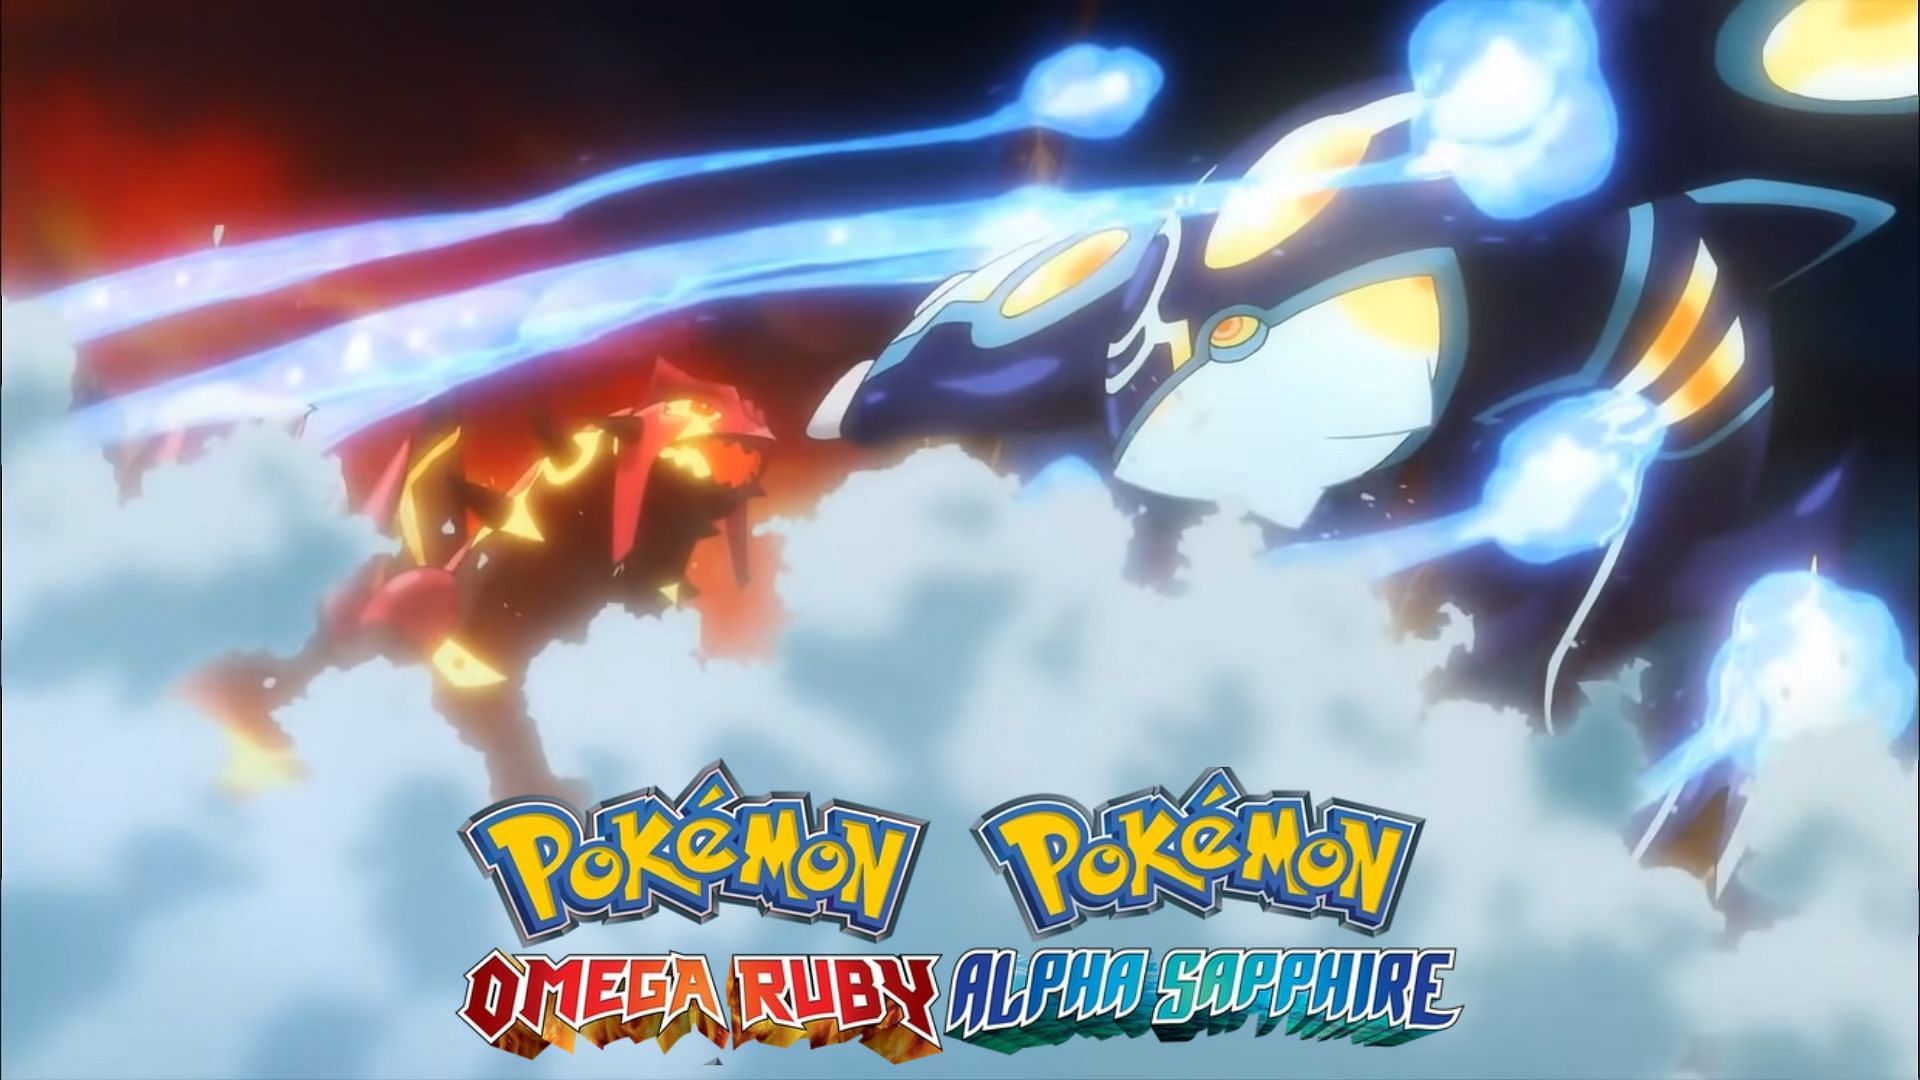 Best team composition for Pokemon Omega Ruby and Alpha Sapphire